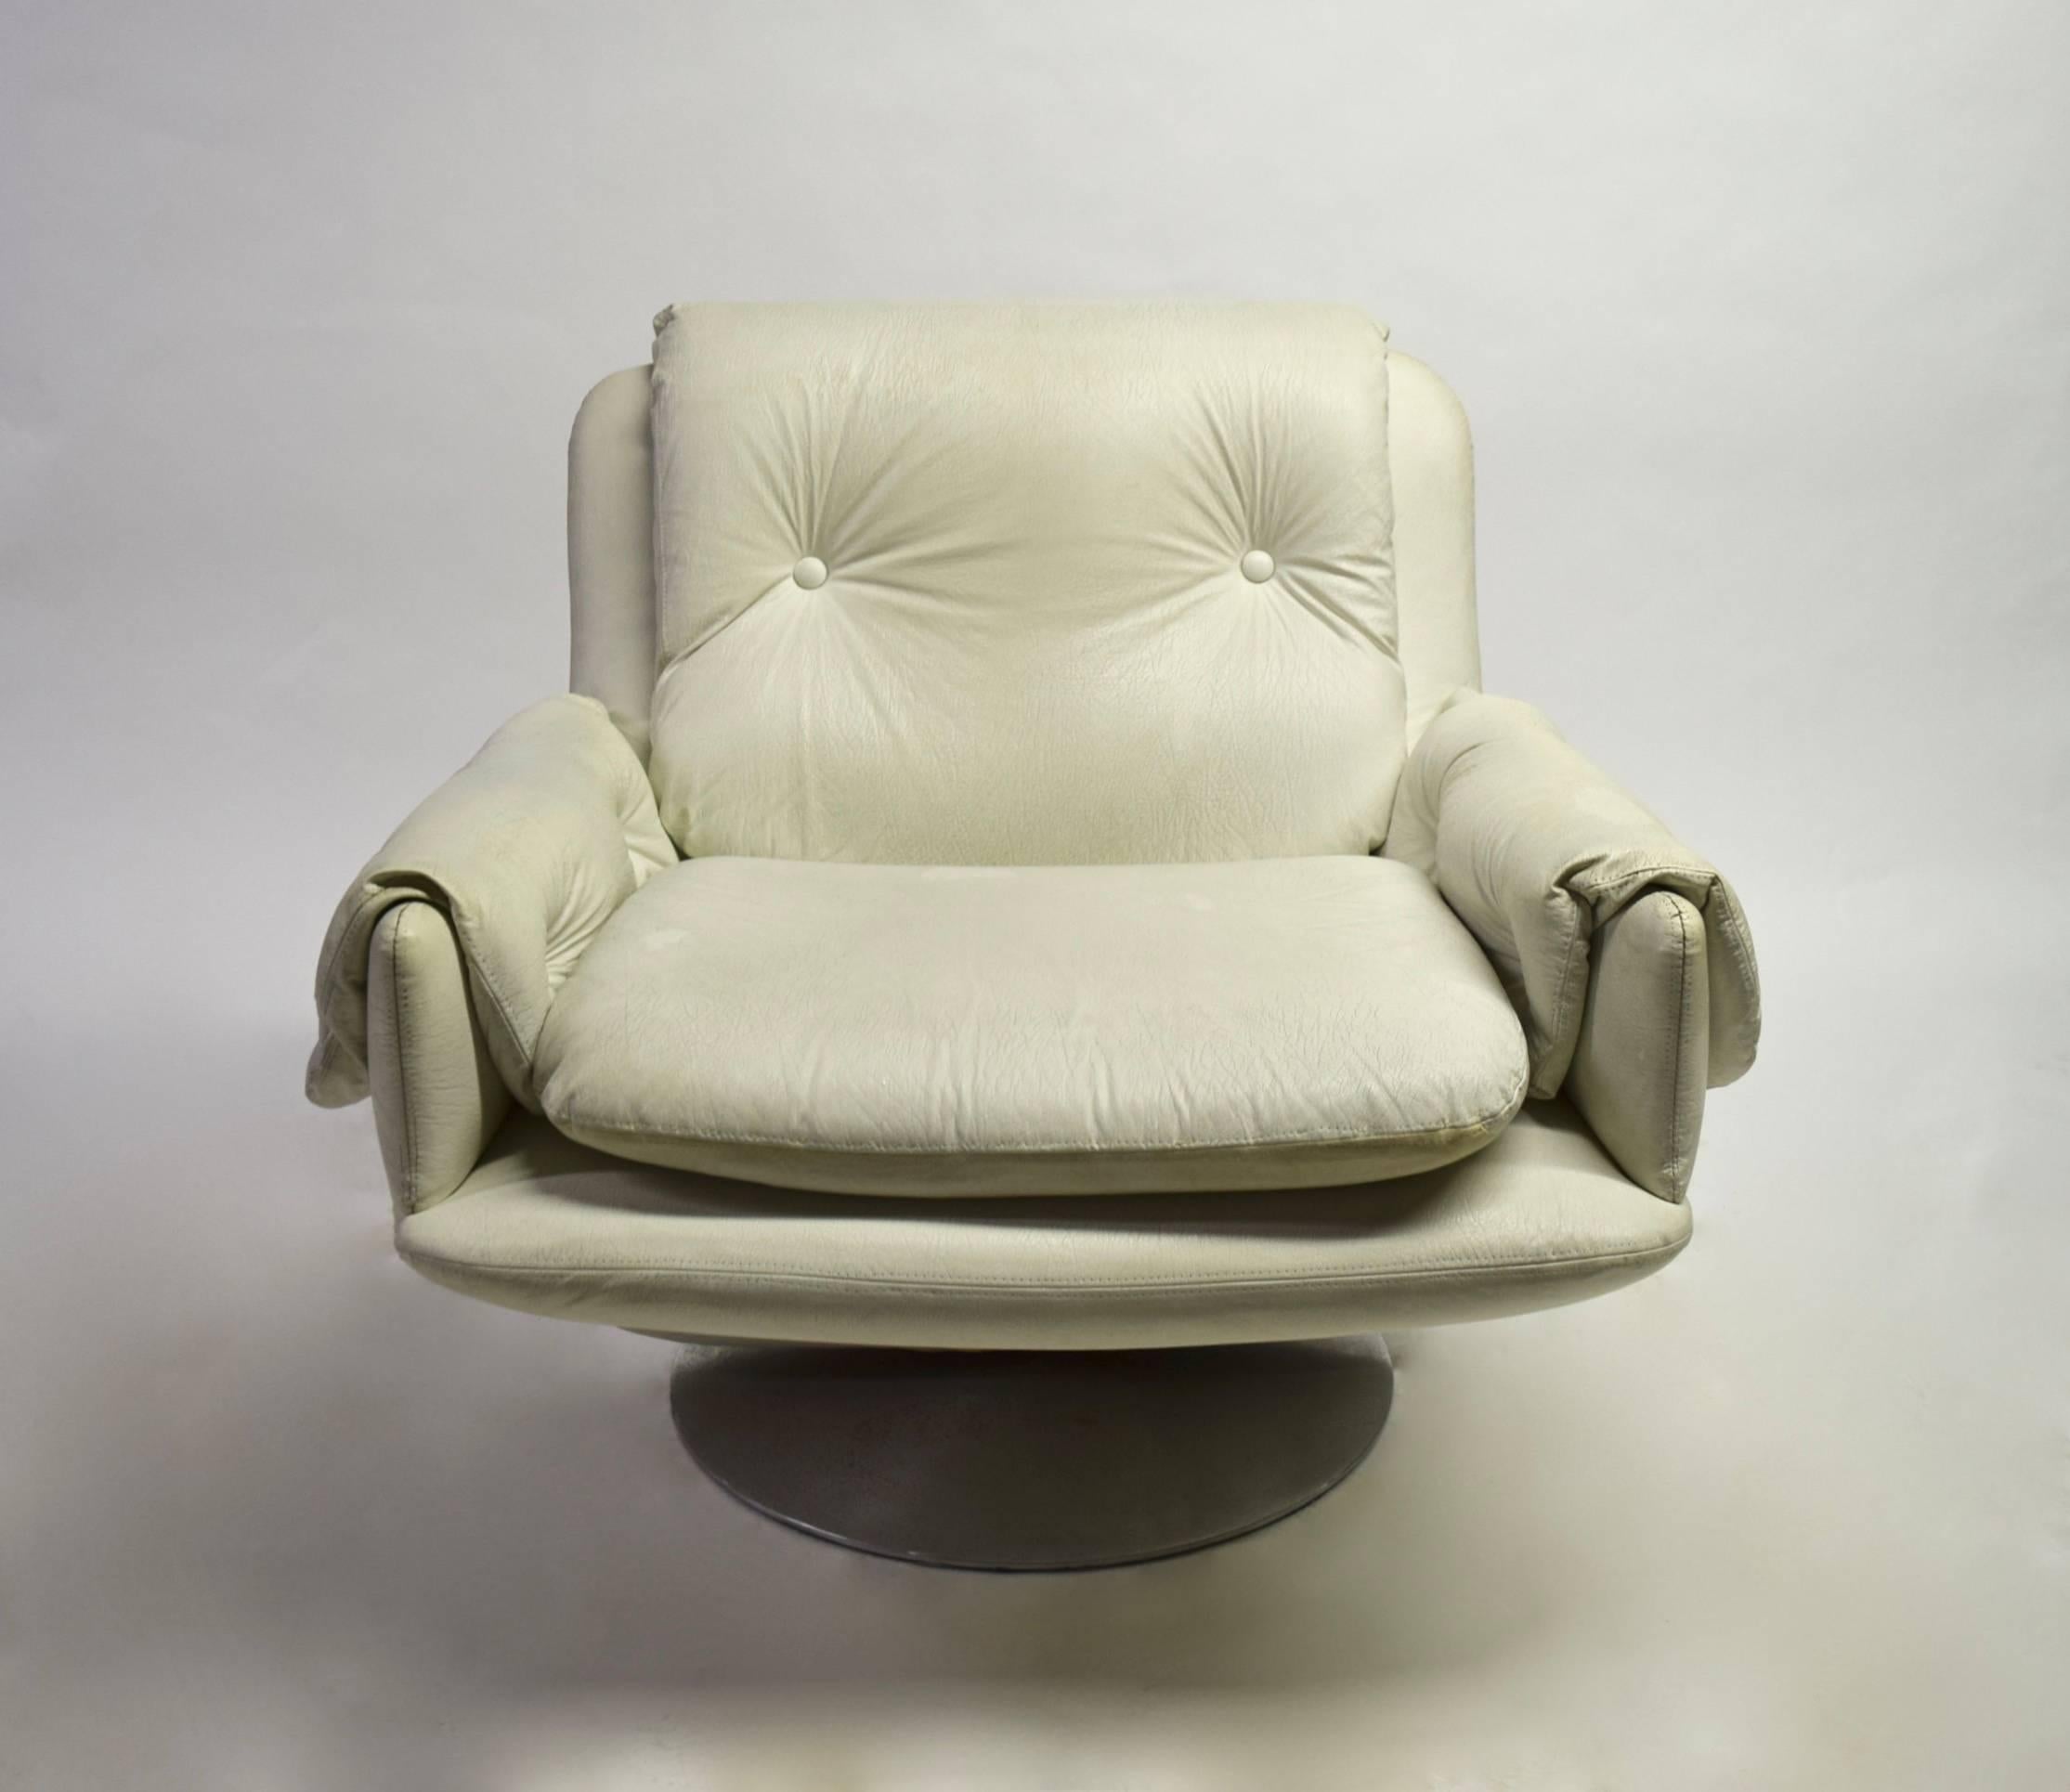 Italian design, very sturdy and comfortable swivel lounge chair in original condition with a round steel base and thick, off-white leatherette upholstery. Arm height is 55 cm (approximately 21.5